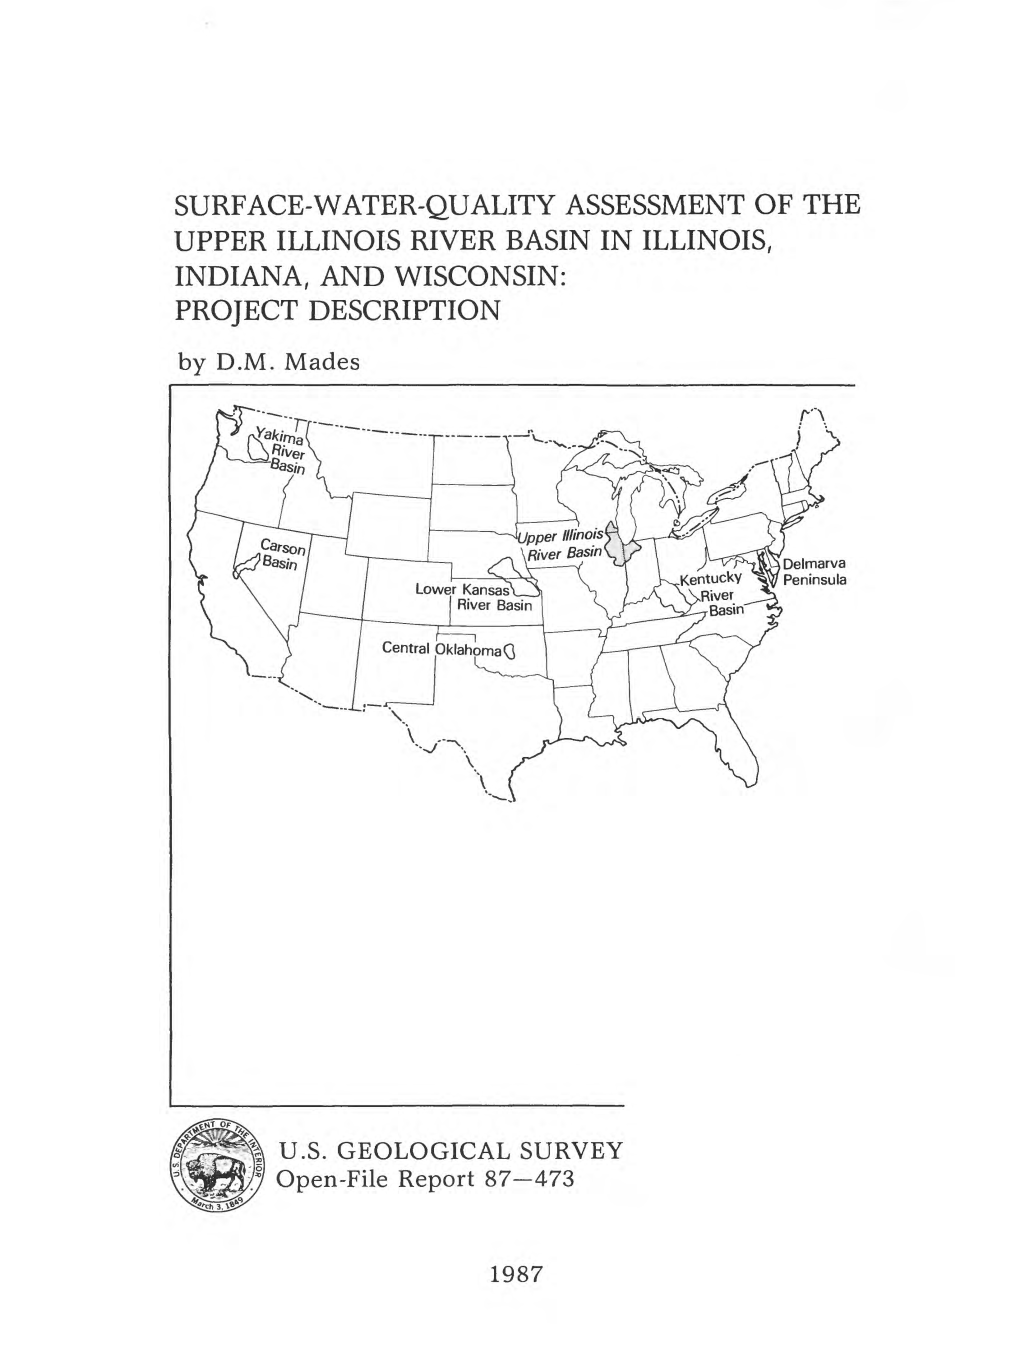 SURFACE-WATER-QUALITY ASSESSMENT of the UPPER ILLINOIS RIVER BASIN in ILLINOIS, INDIANA, and WISCONSIN: PROJECT DESCRIPTION by D.M